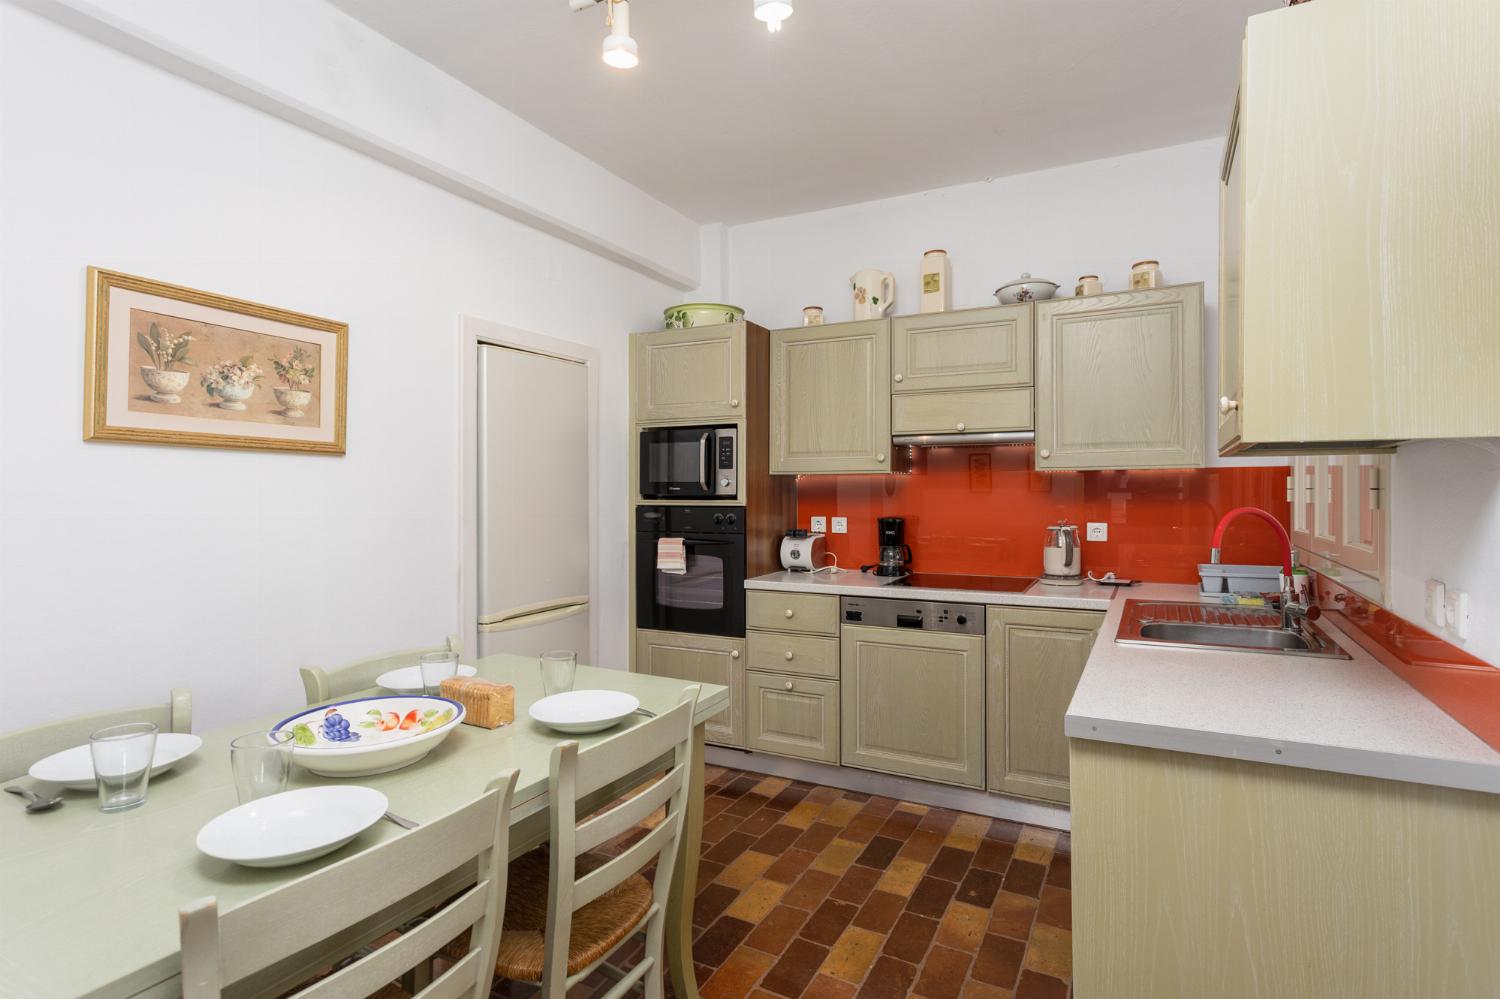 Equipped kitchen on ground floor with dining area